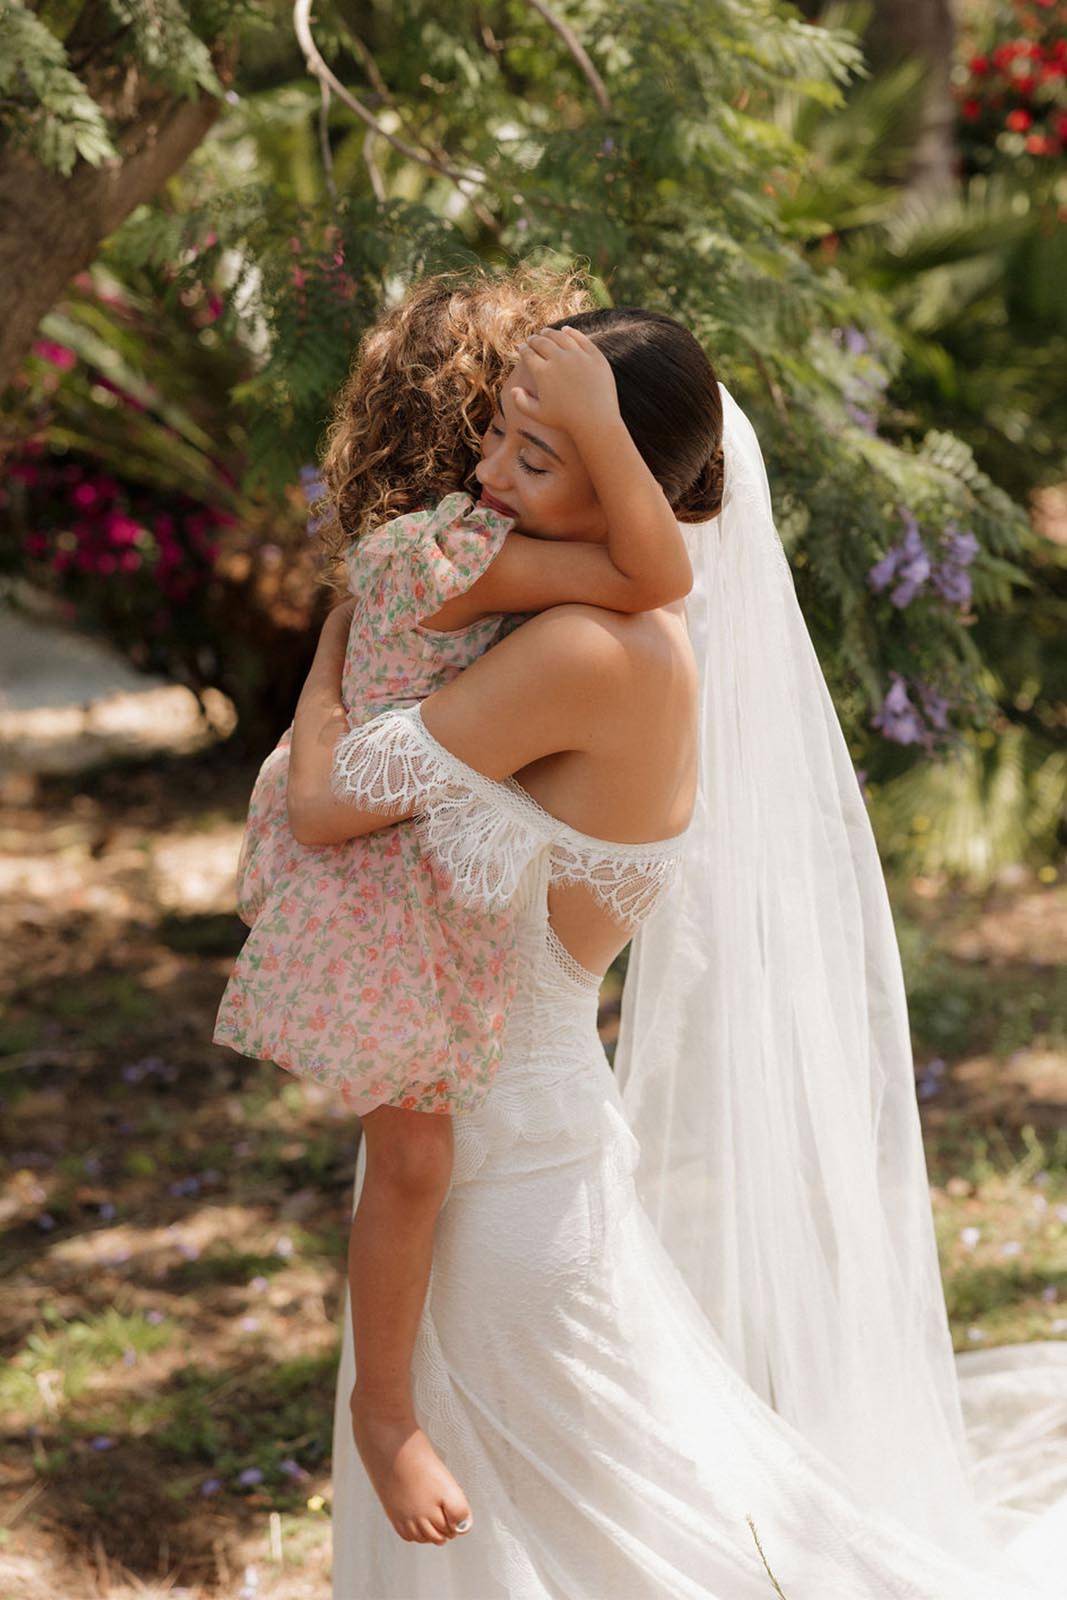 Bride, holding a cute little girl in her arms